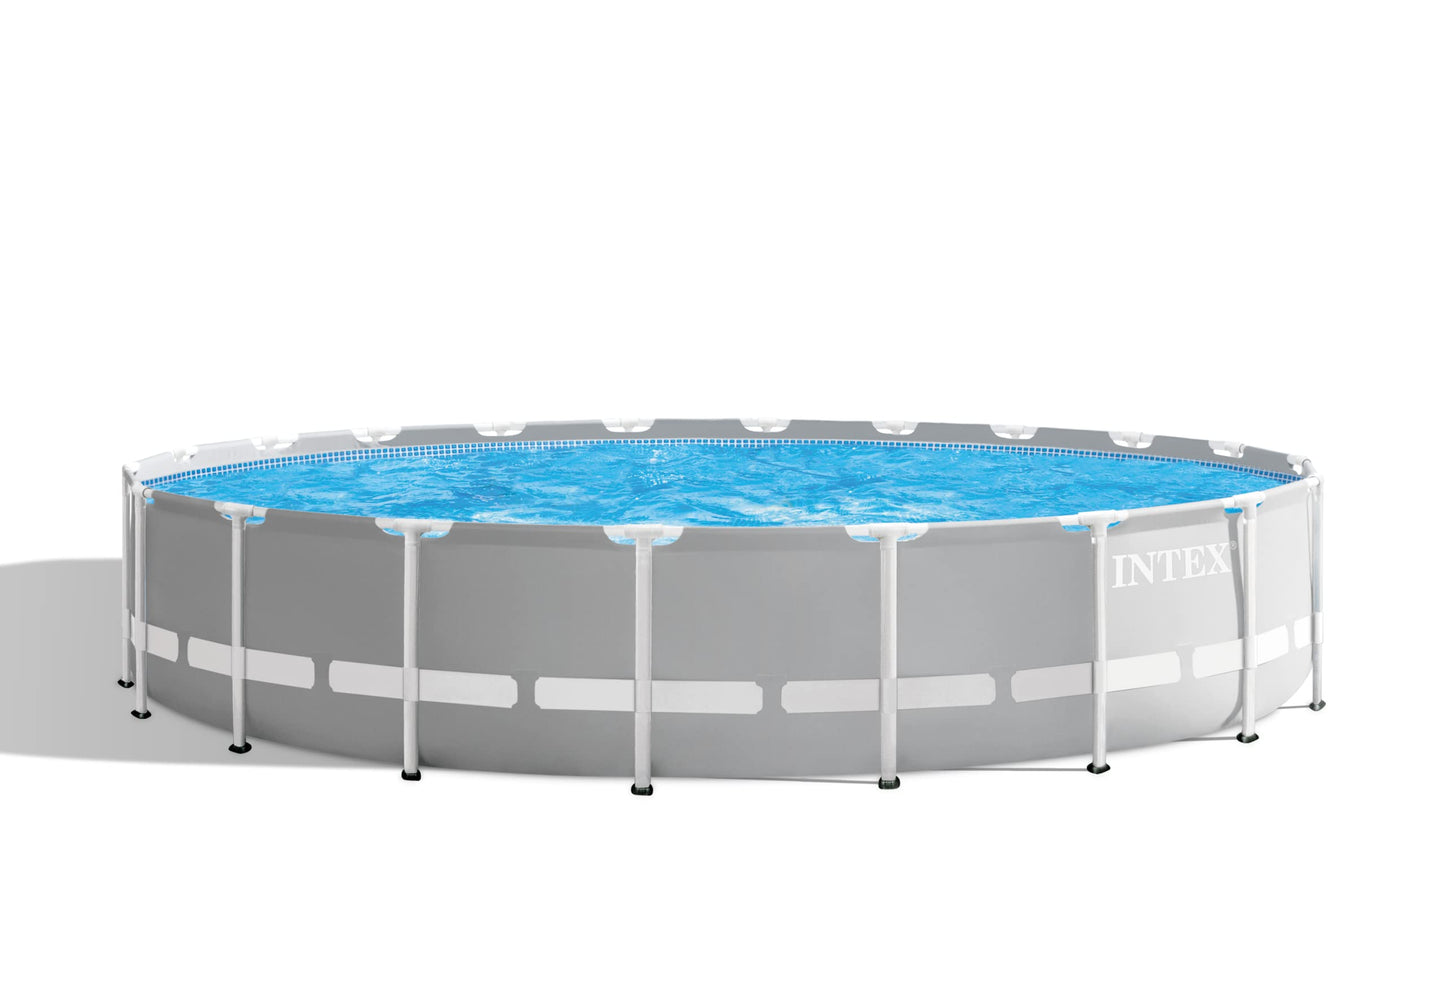 INTEX 26755EH Prism Frame Premium Above Ground Swimming Pool Set: 20ft x 52in – Includes 1500 GPH Cartridge Filter Pump – Removable Ladder – Pool Cover – Ground Cloth Frame Pool